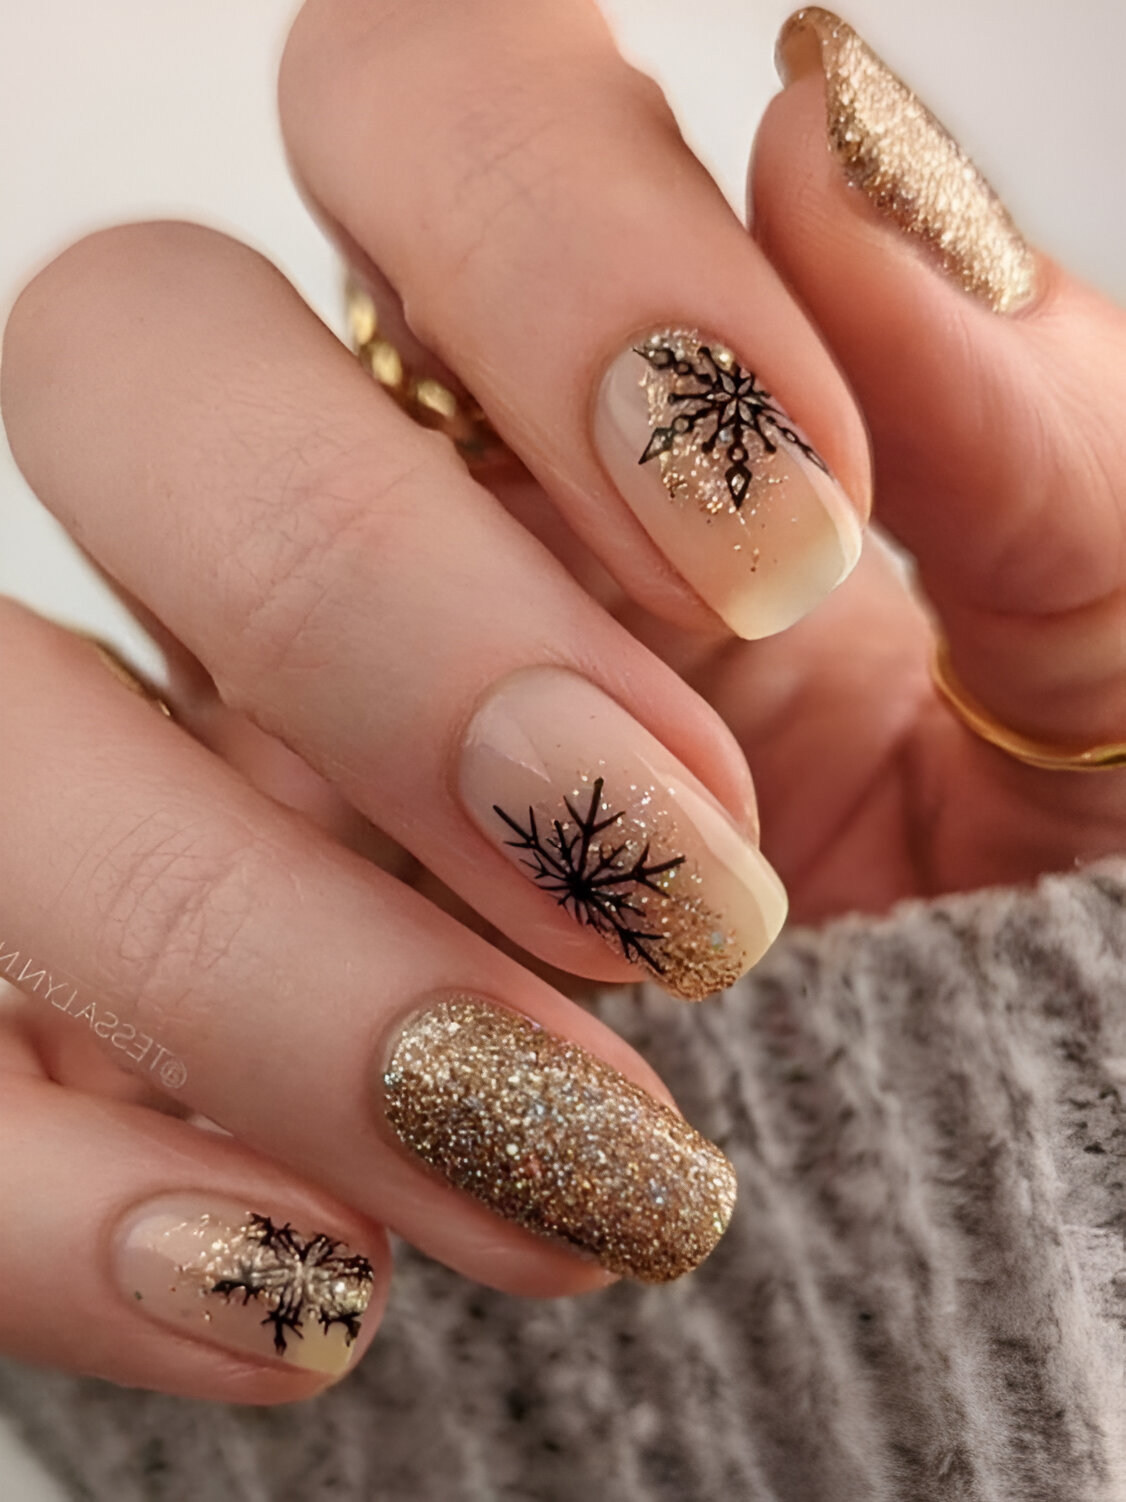 Gold Festive Nail Art With Snowflakes